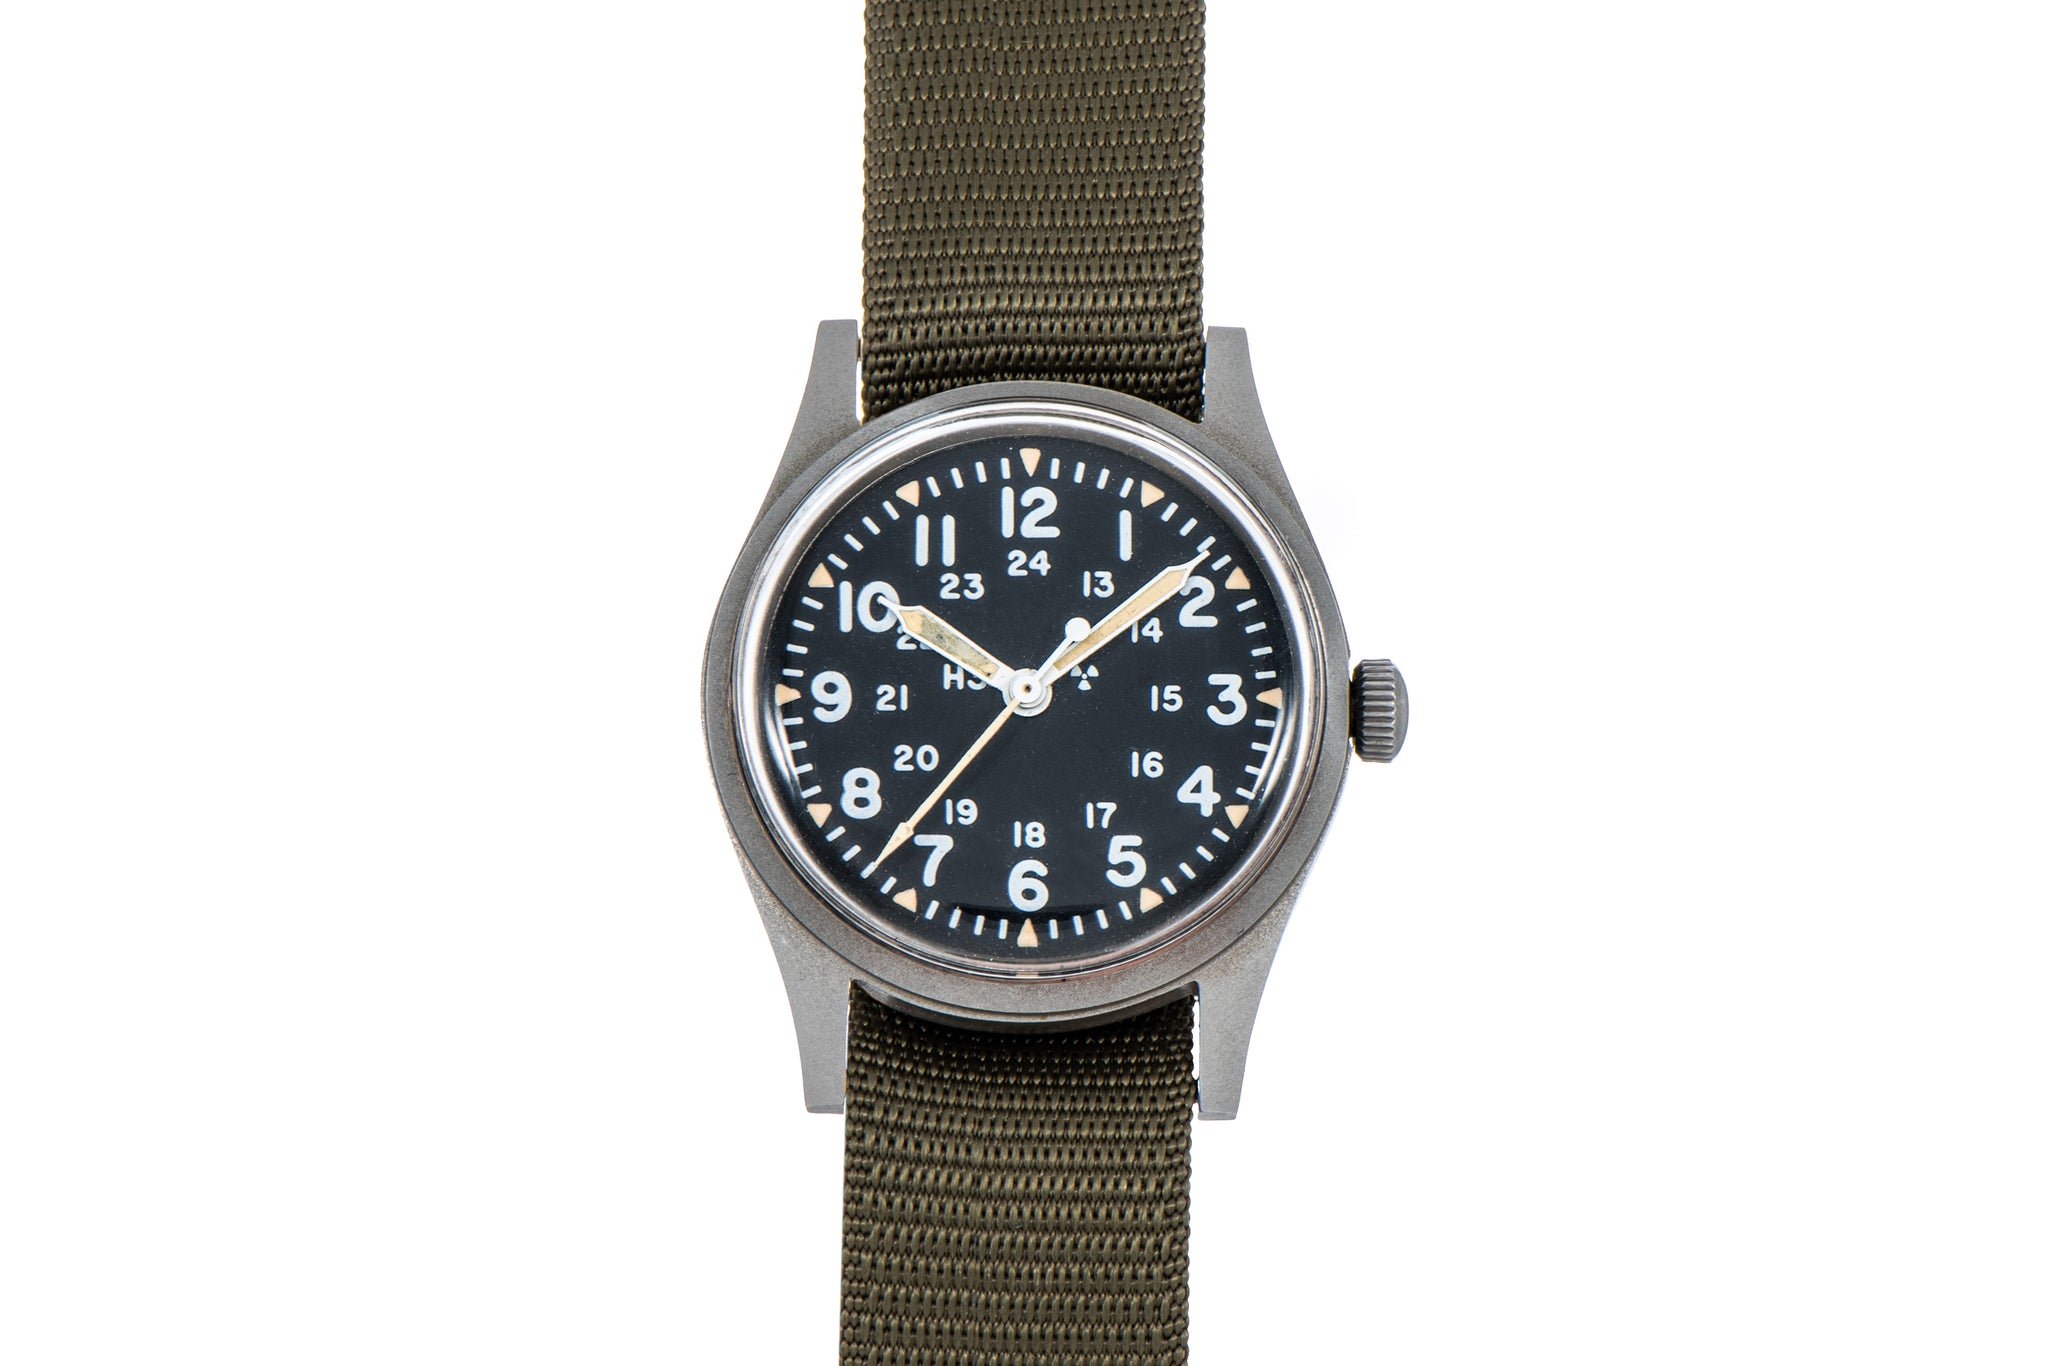 Why You Should Collect Military Watches – Analog:Shift